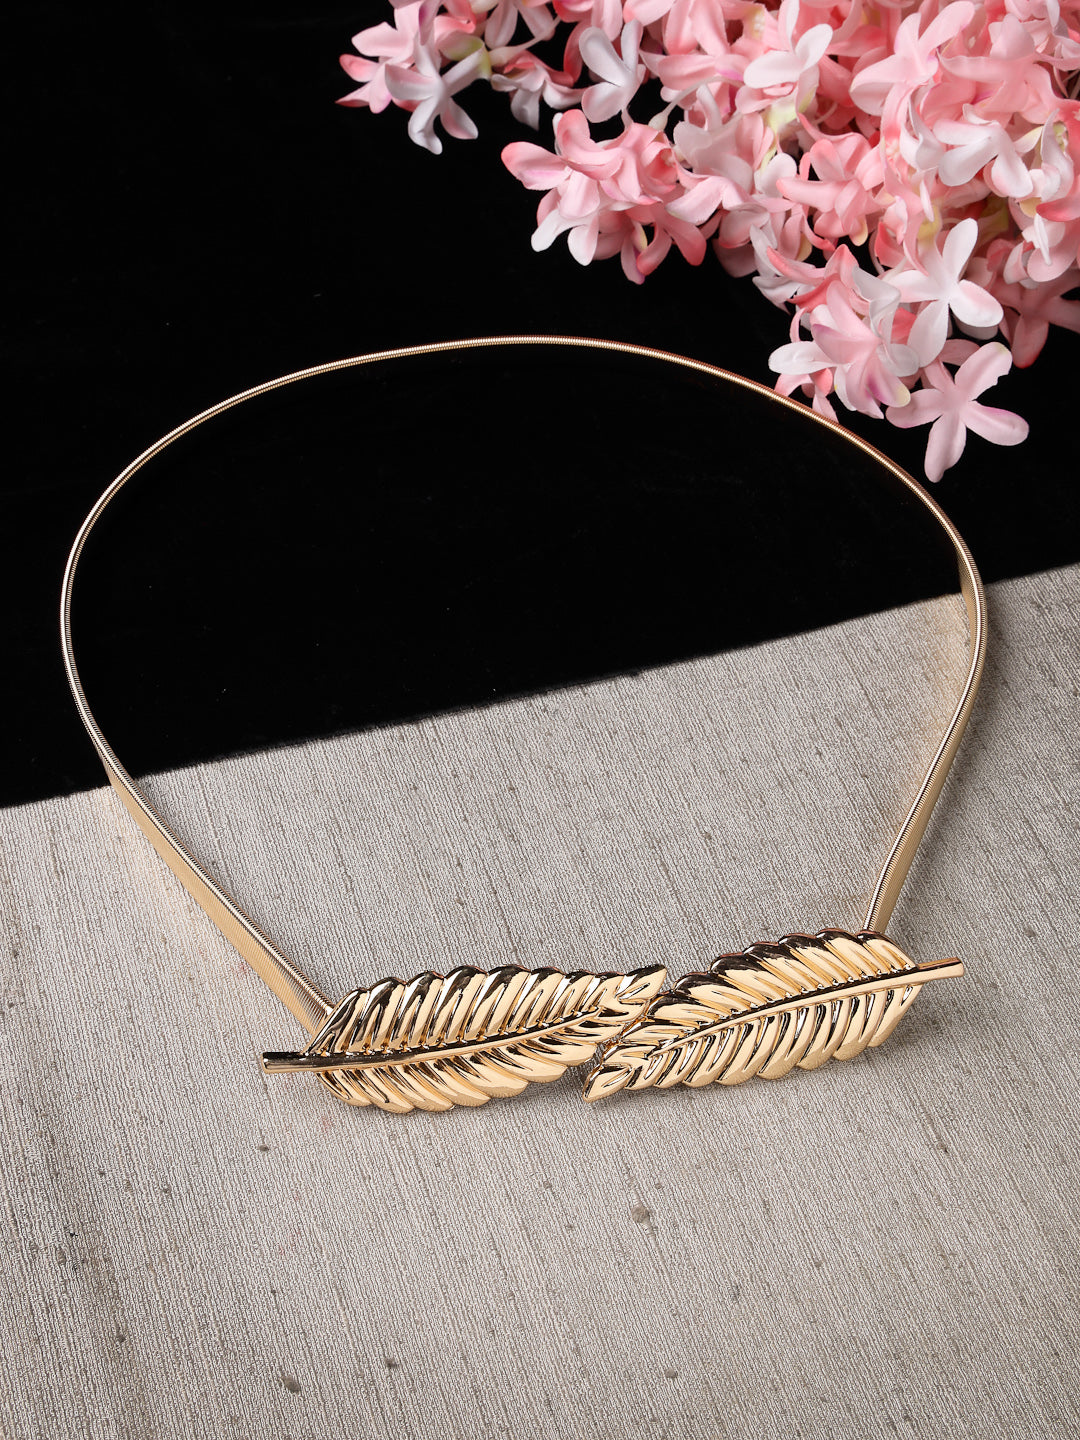 Women's circular gold plated stretchable metal belt - NVR